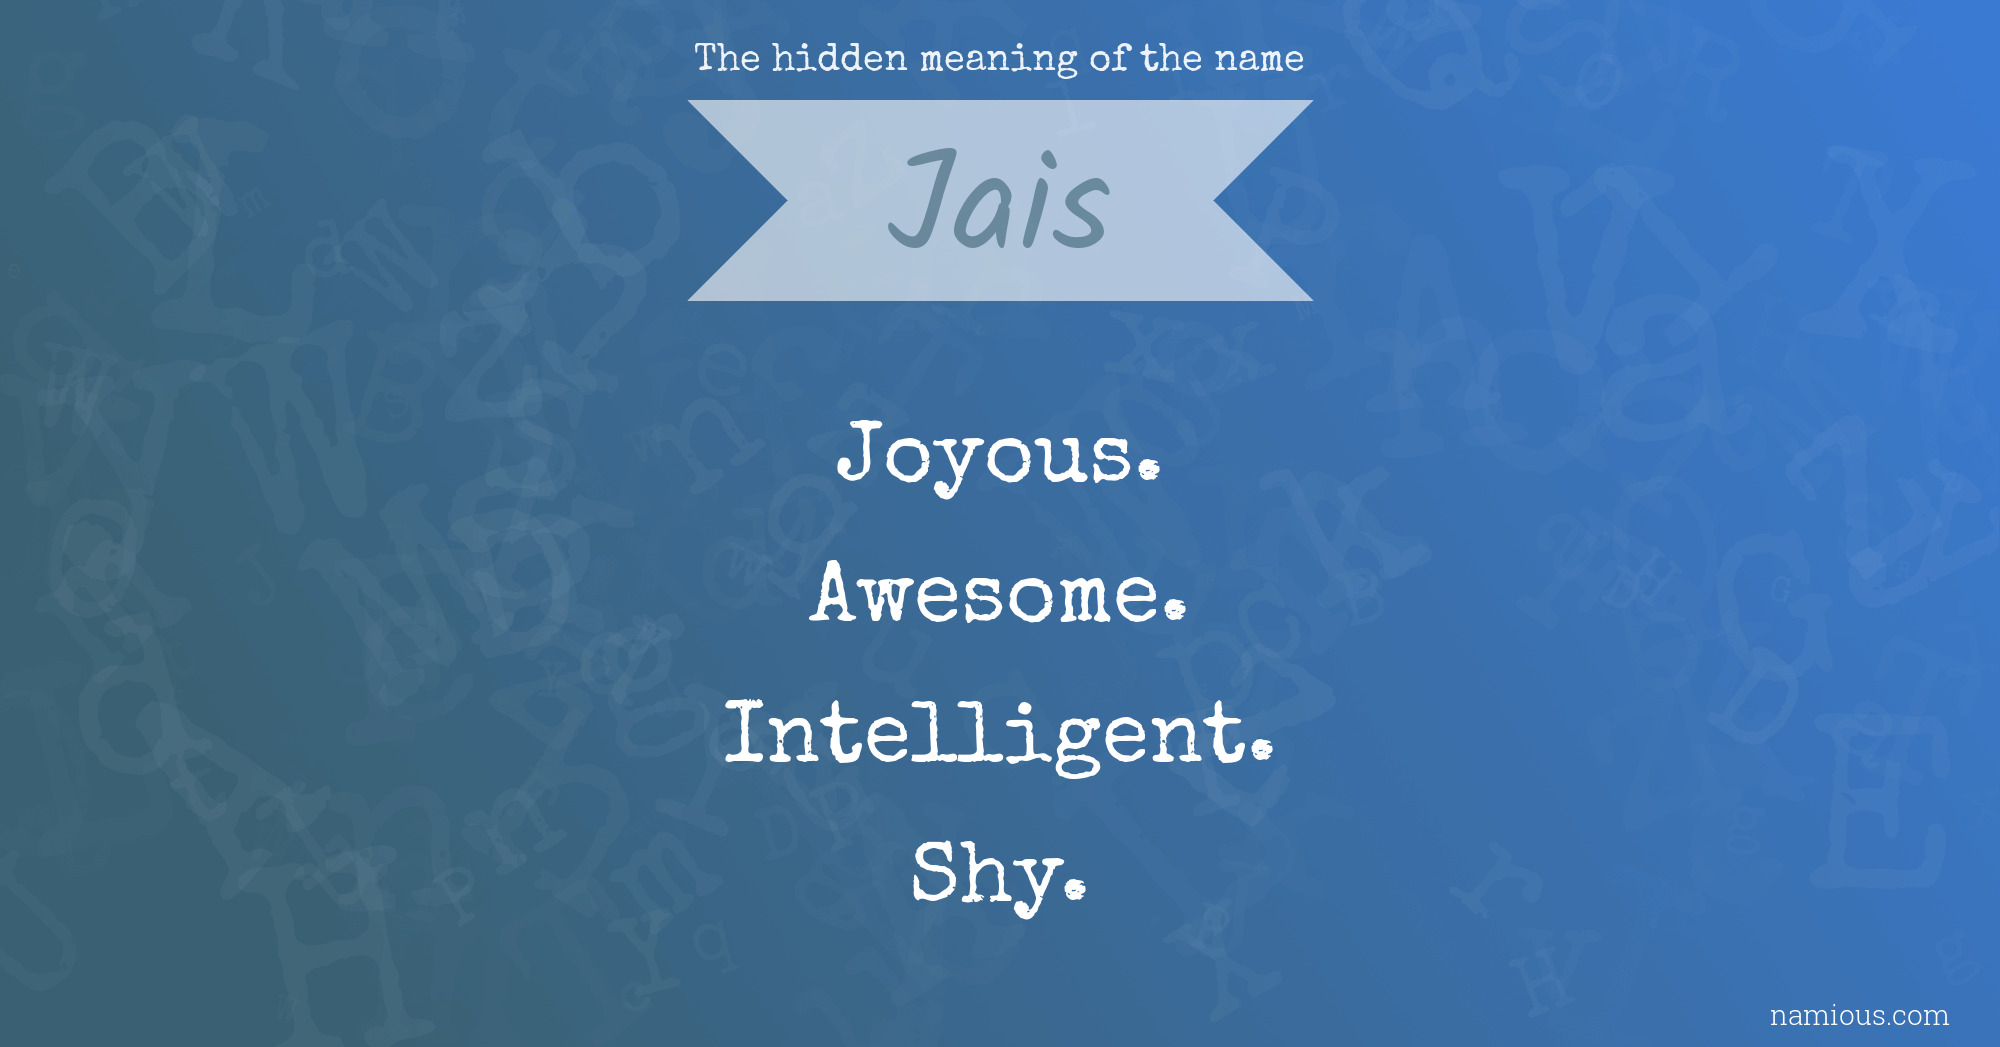 The hidden meaning of the name Jais